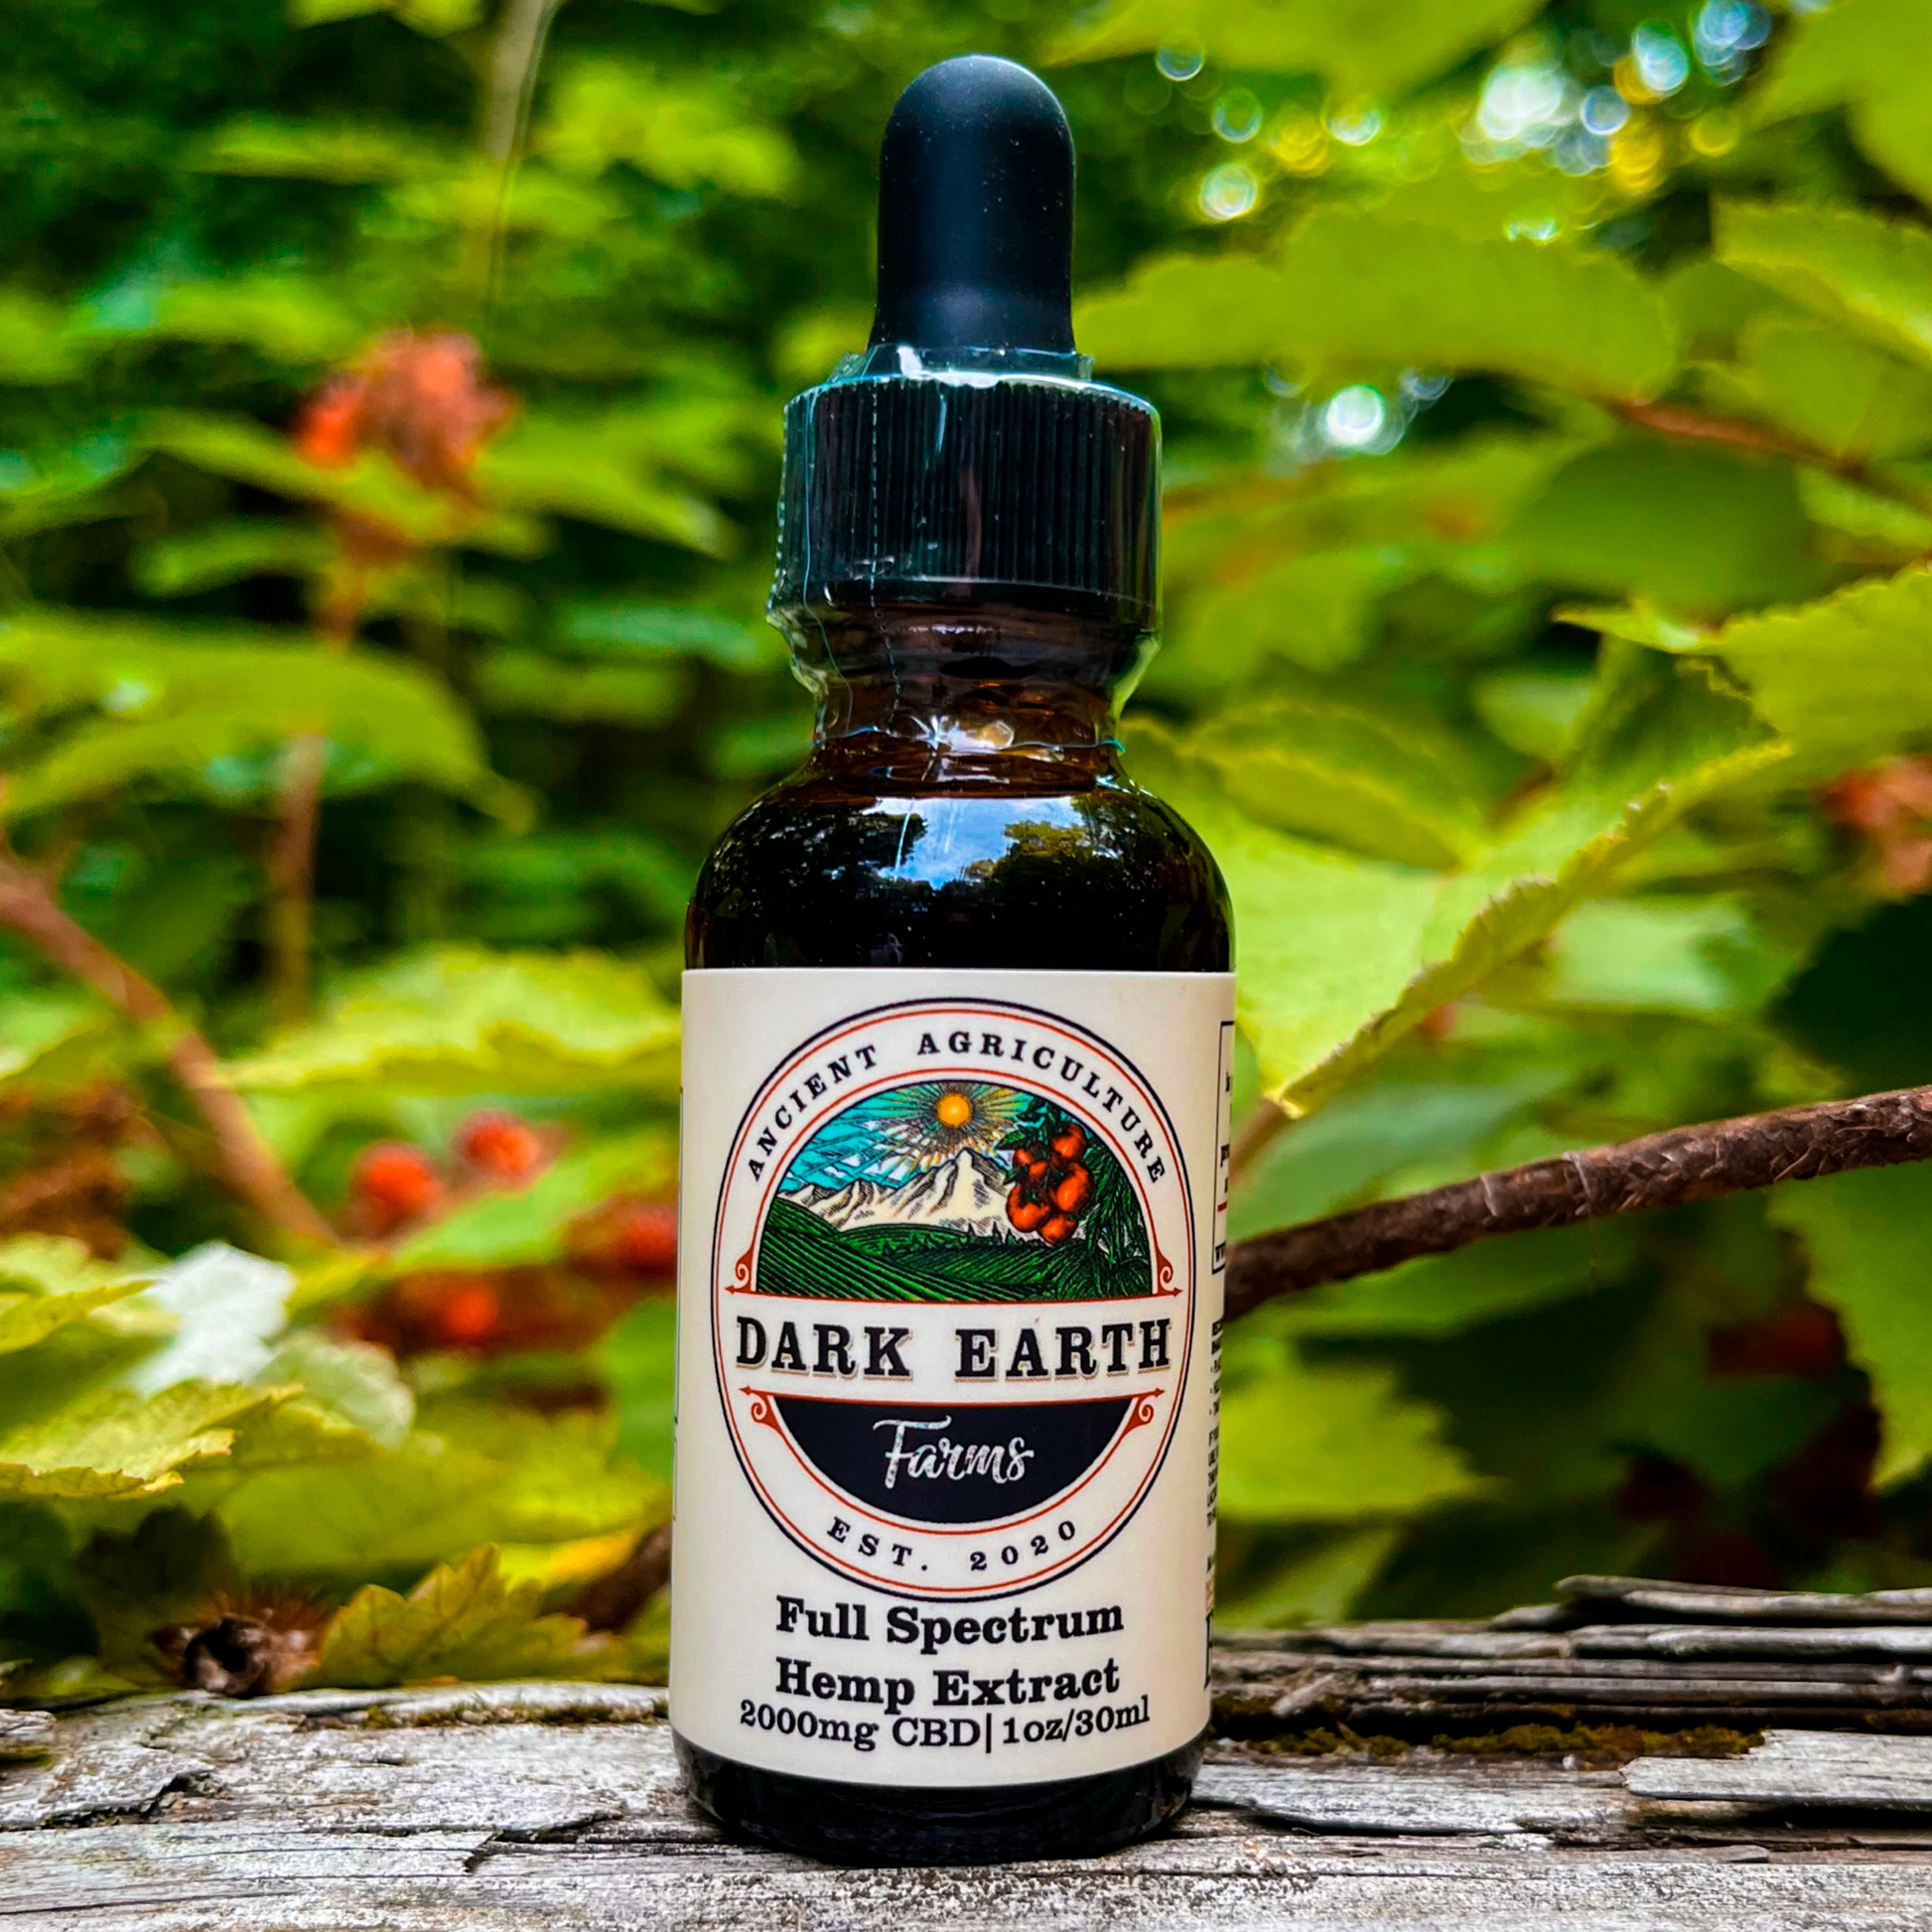 An image of a small bottle labeled Dark Earth Farms Full Spectrum Hemp Extract, featuring a green and yellow label with the brand name and product information. The bottle contains 2000mg of CBD oil with terpenes and cannabinoids, specifically designed to help alleviate pain, anxiety, and improve sleep. The bottle is placed on a wooden surface, surrounded by hemp leaves and a small dropper next to it, ready for use.